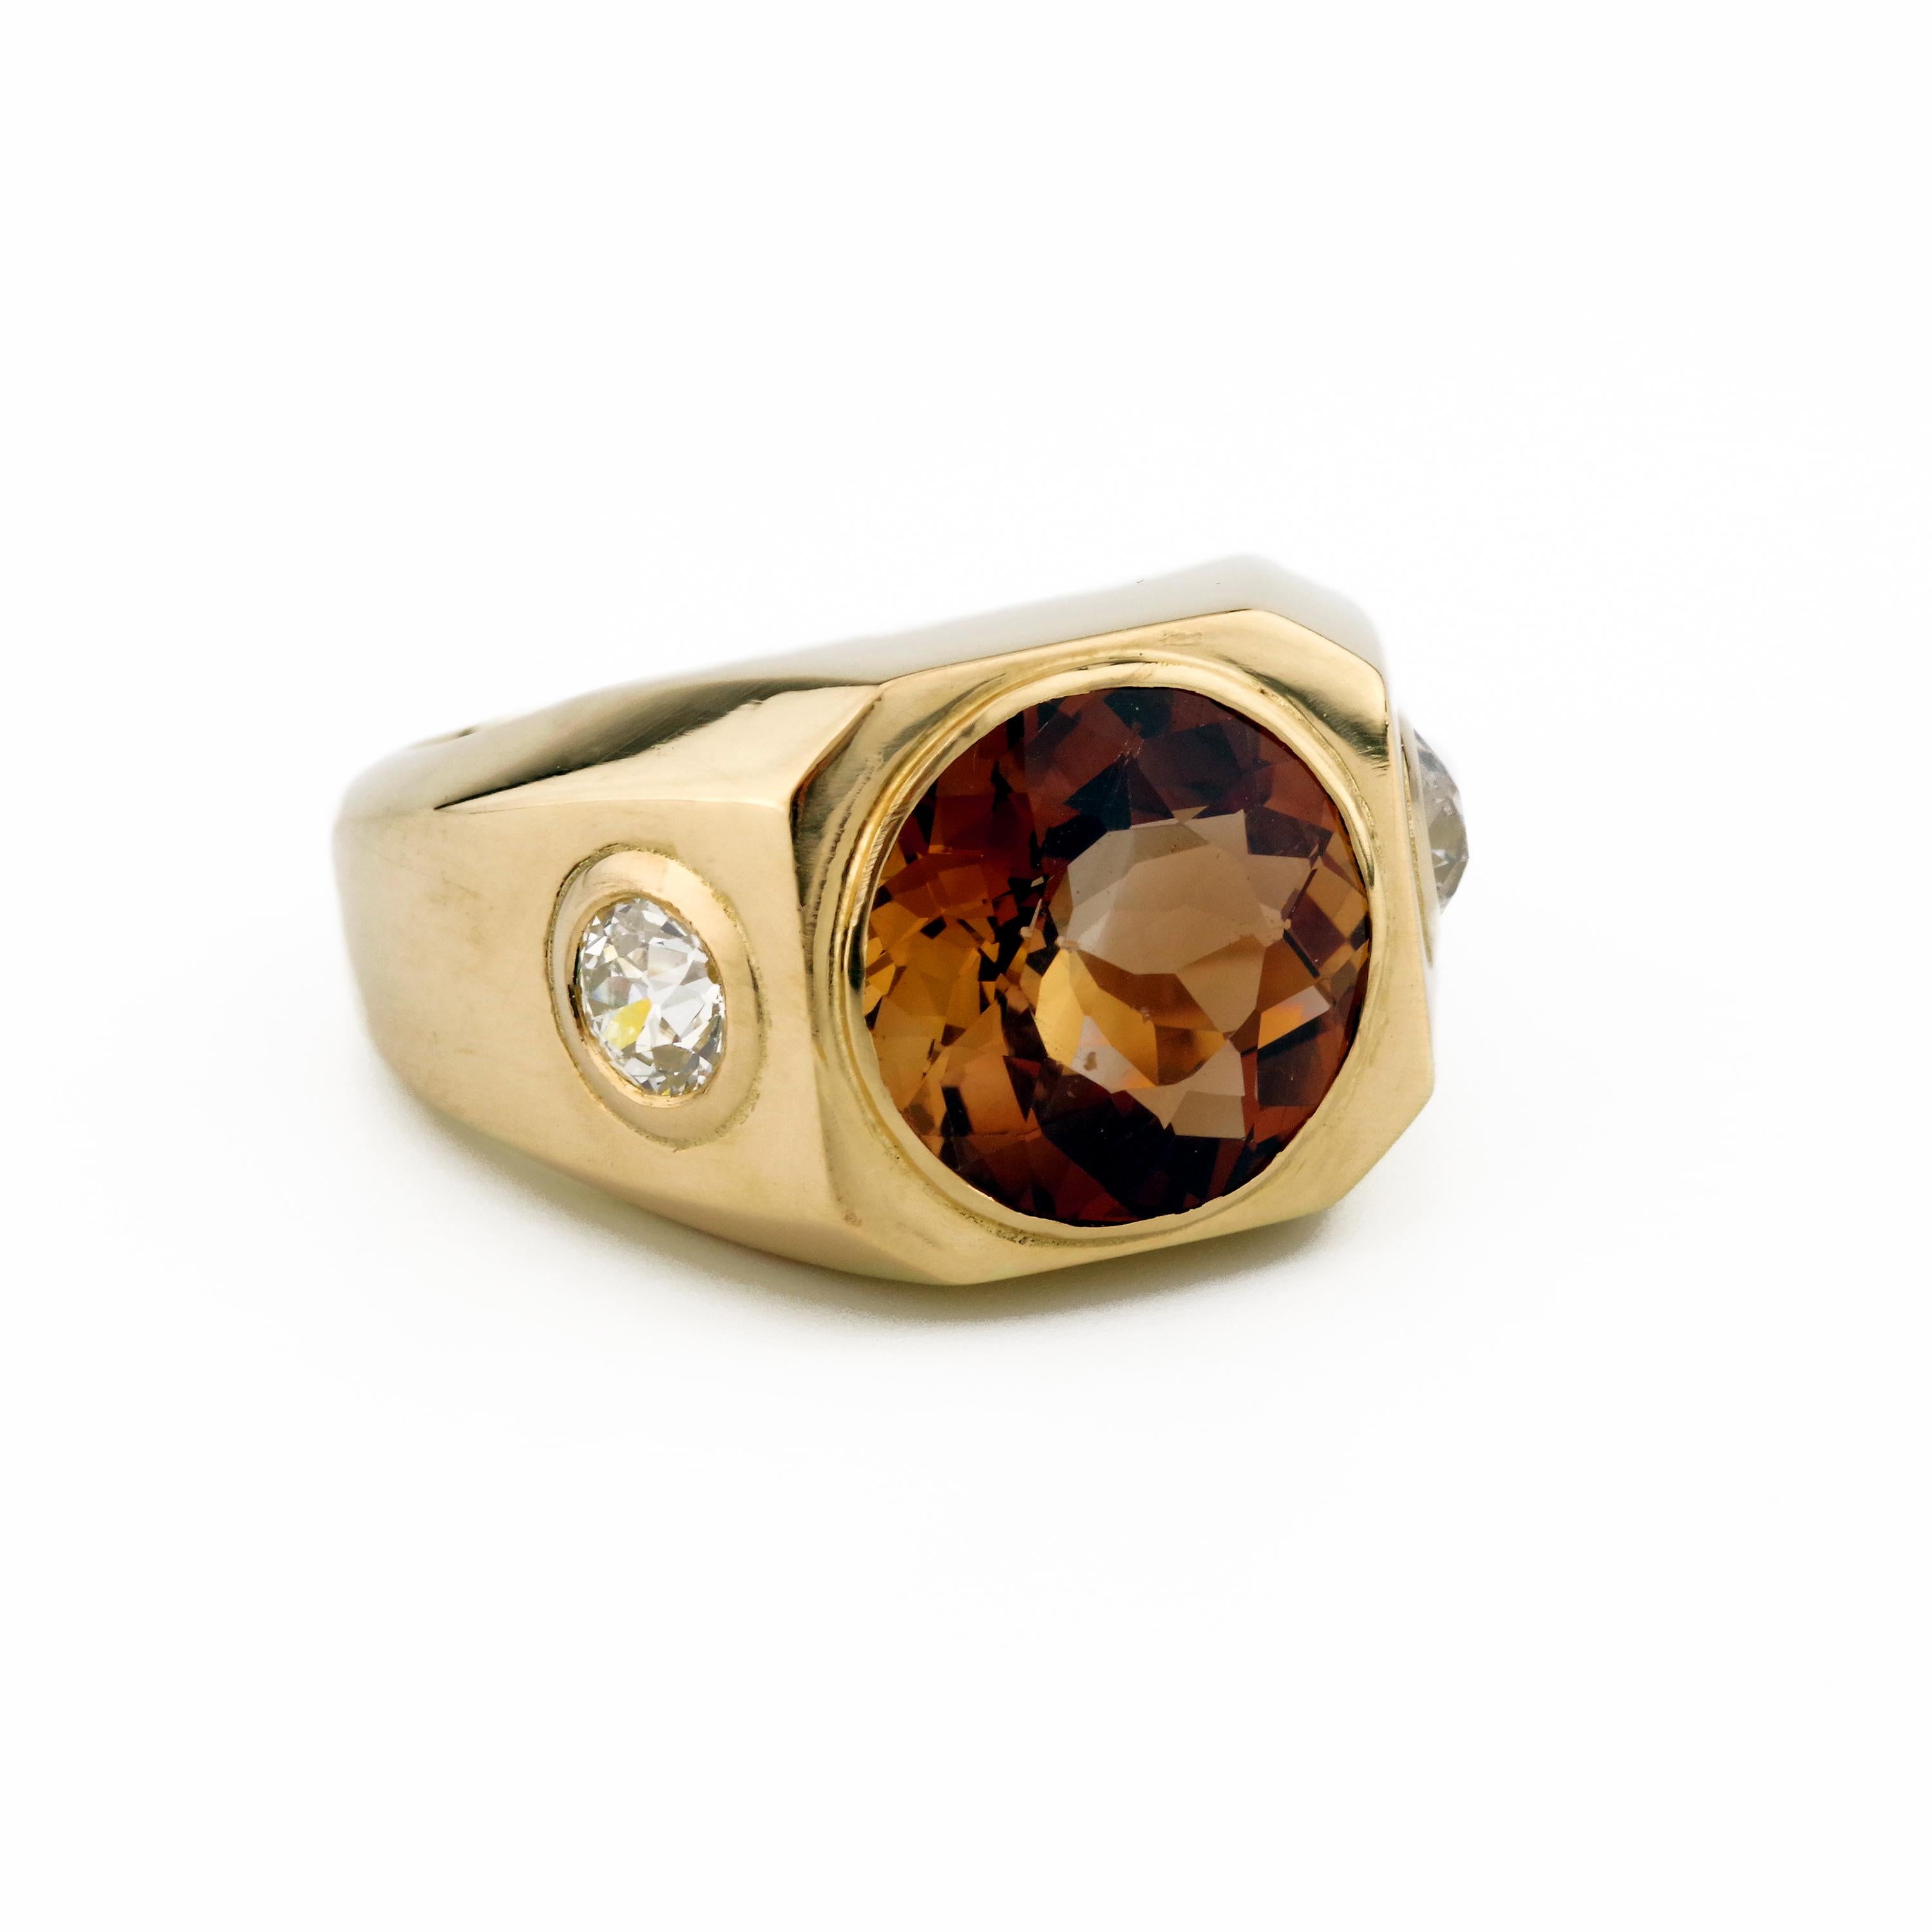 Round Cut Men's Precious Topaz Ring in Whiskey is Ruggedly Handsome